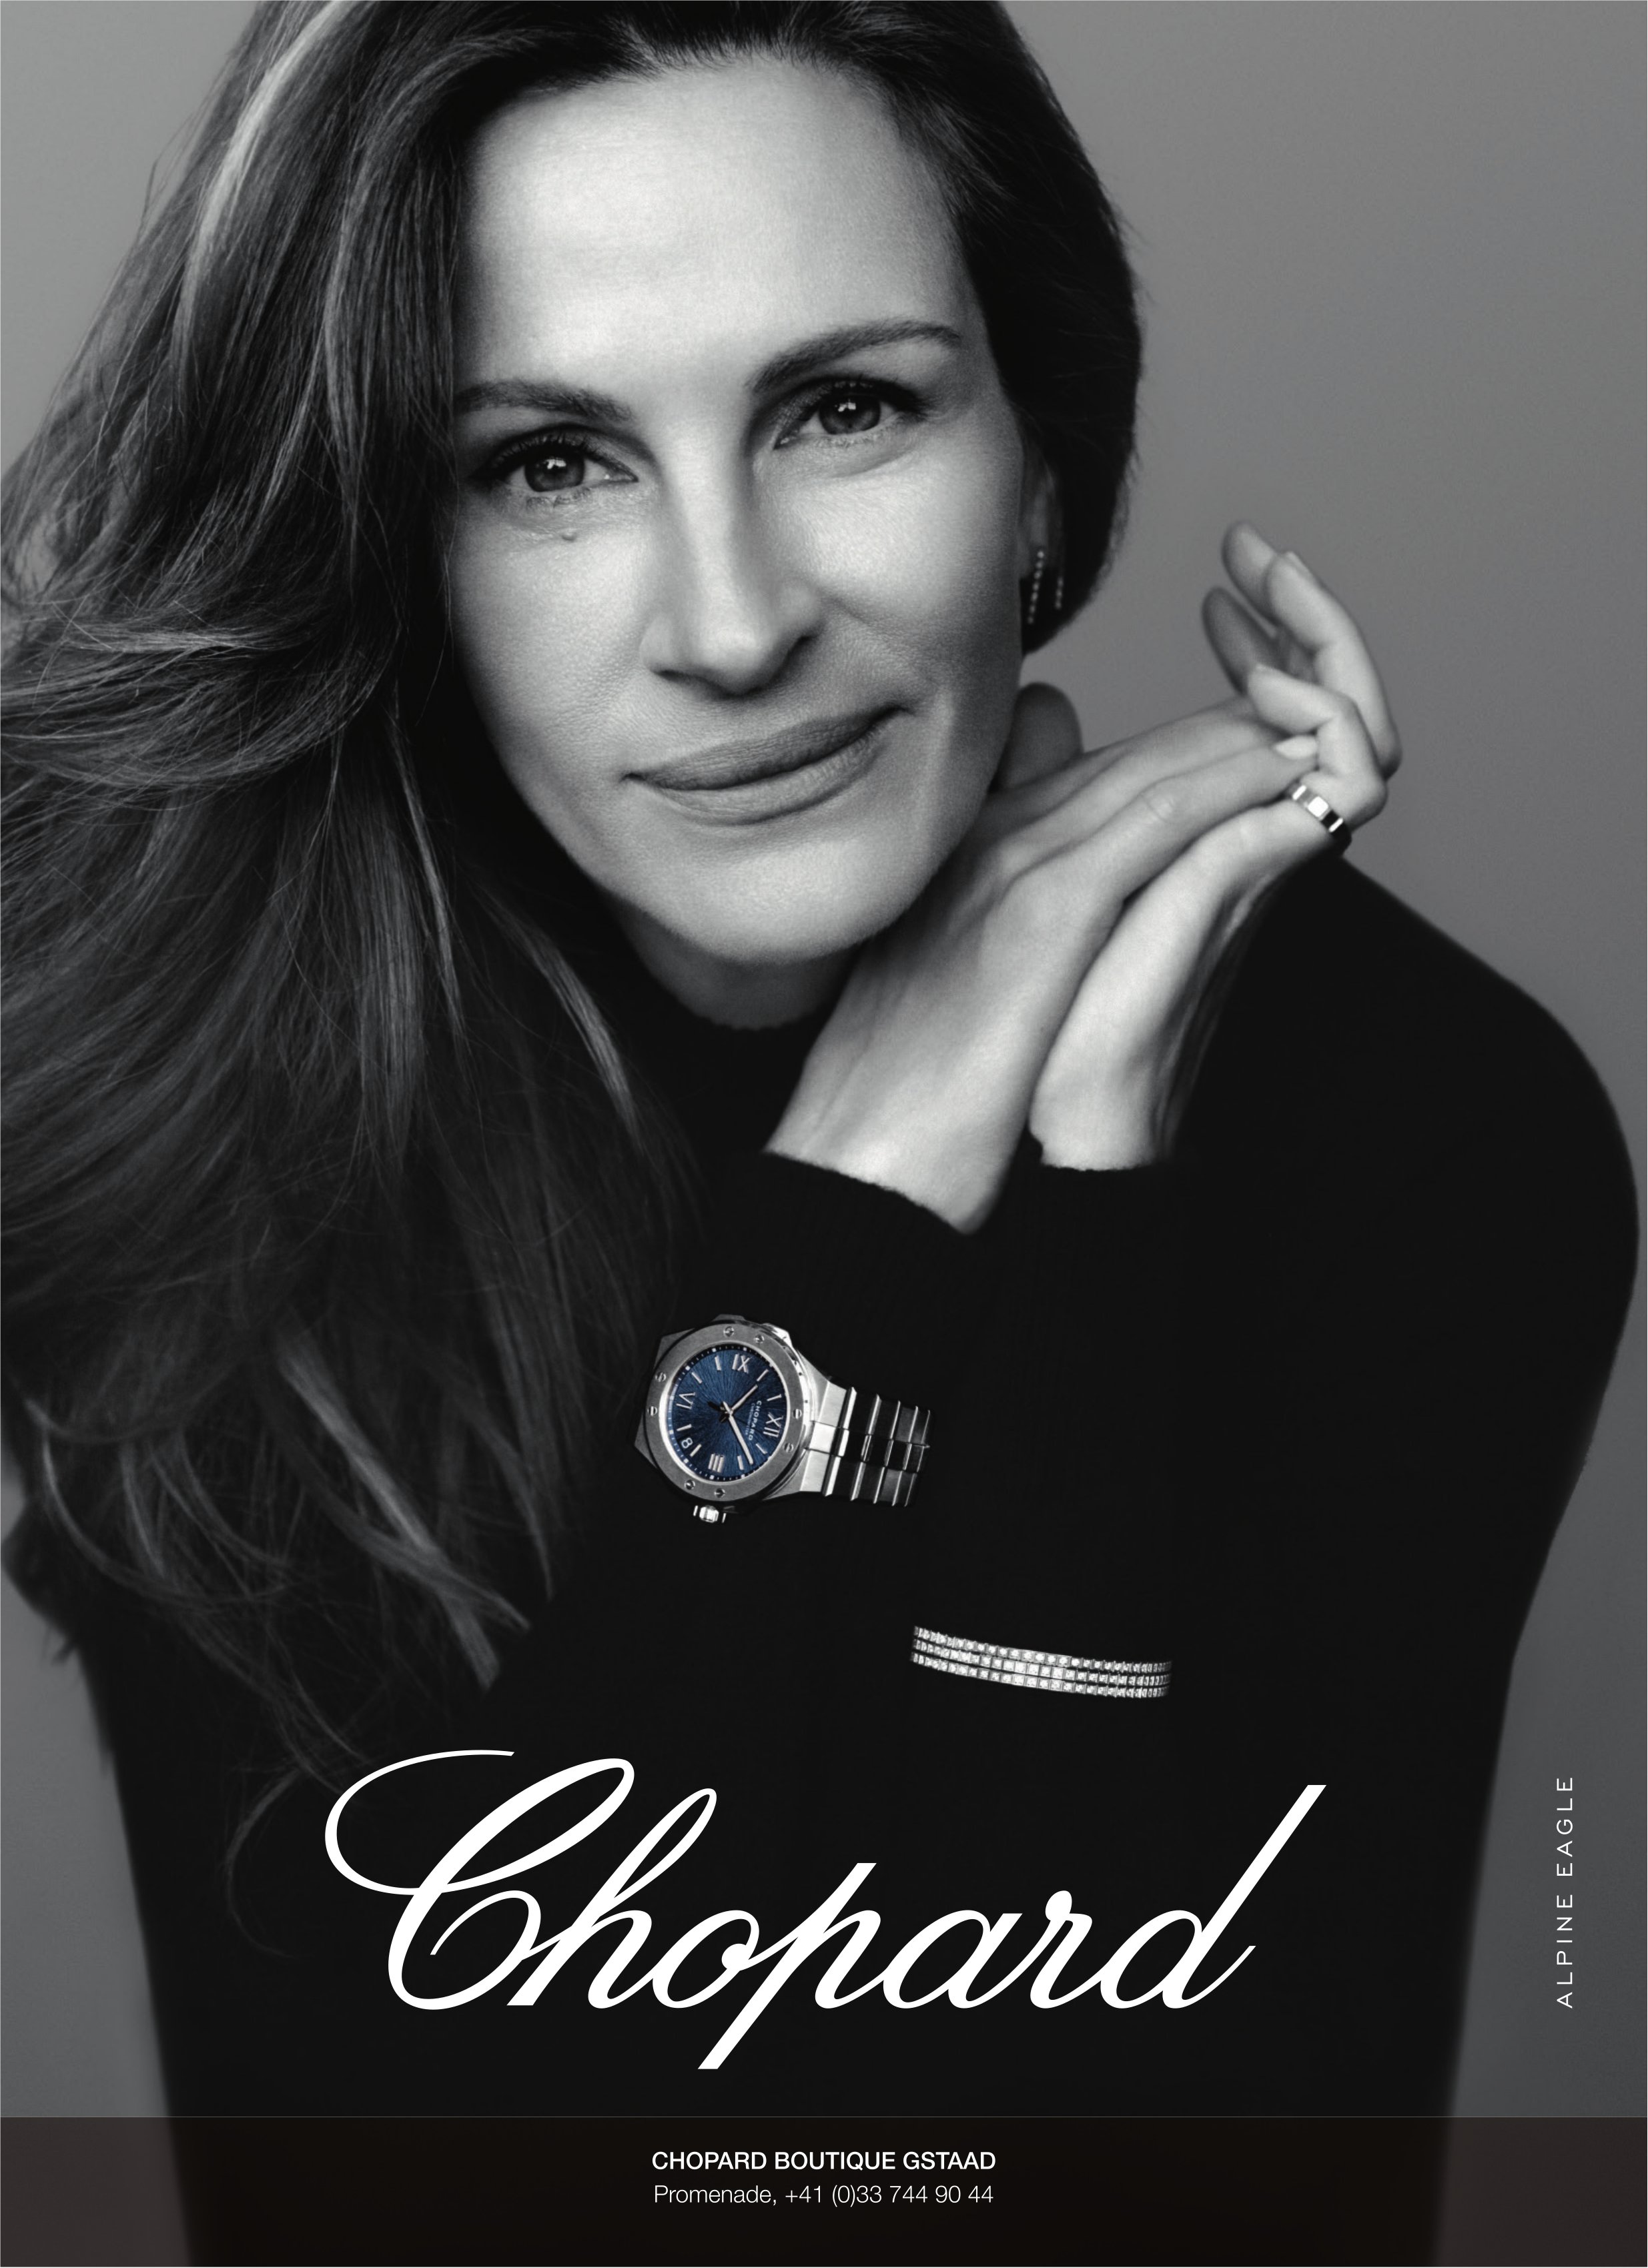 Chopard Boutique, Gstaad